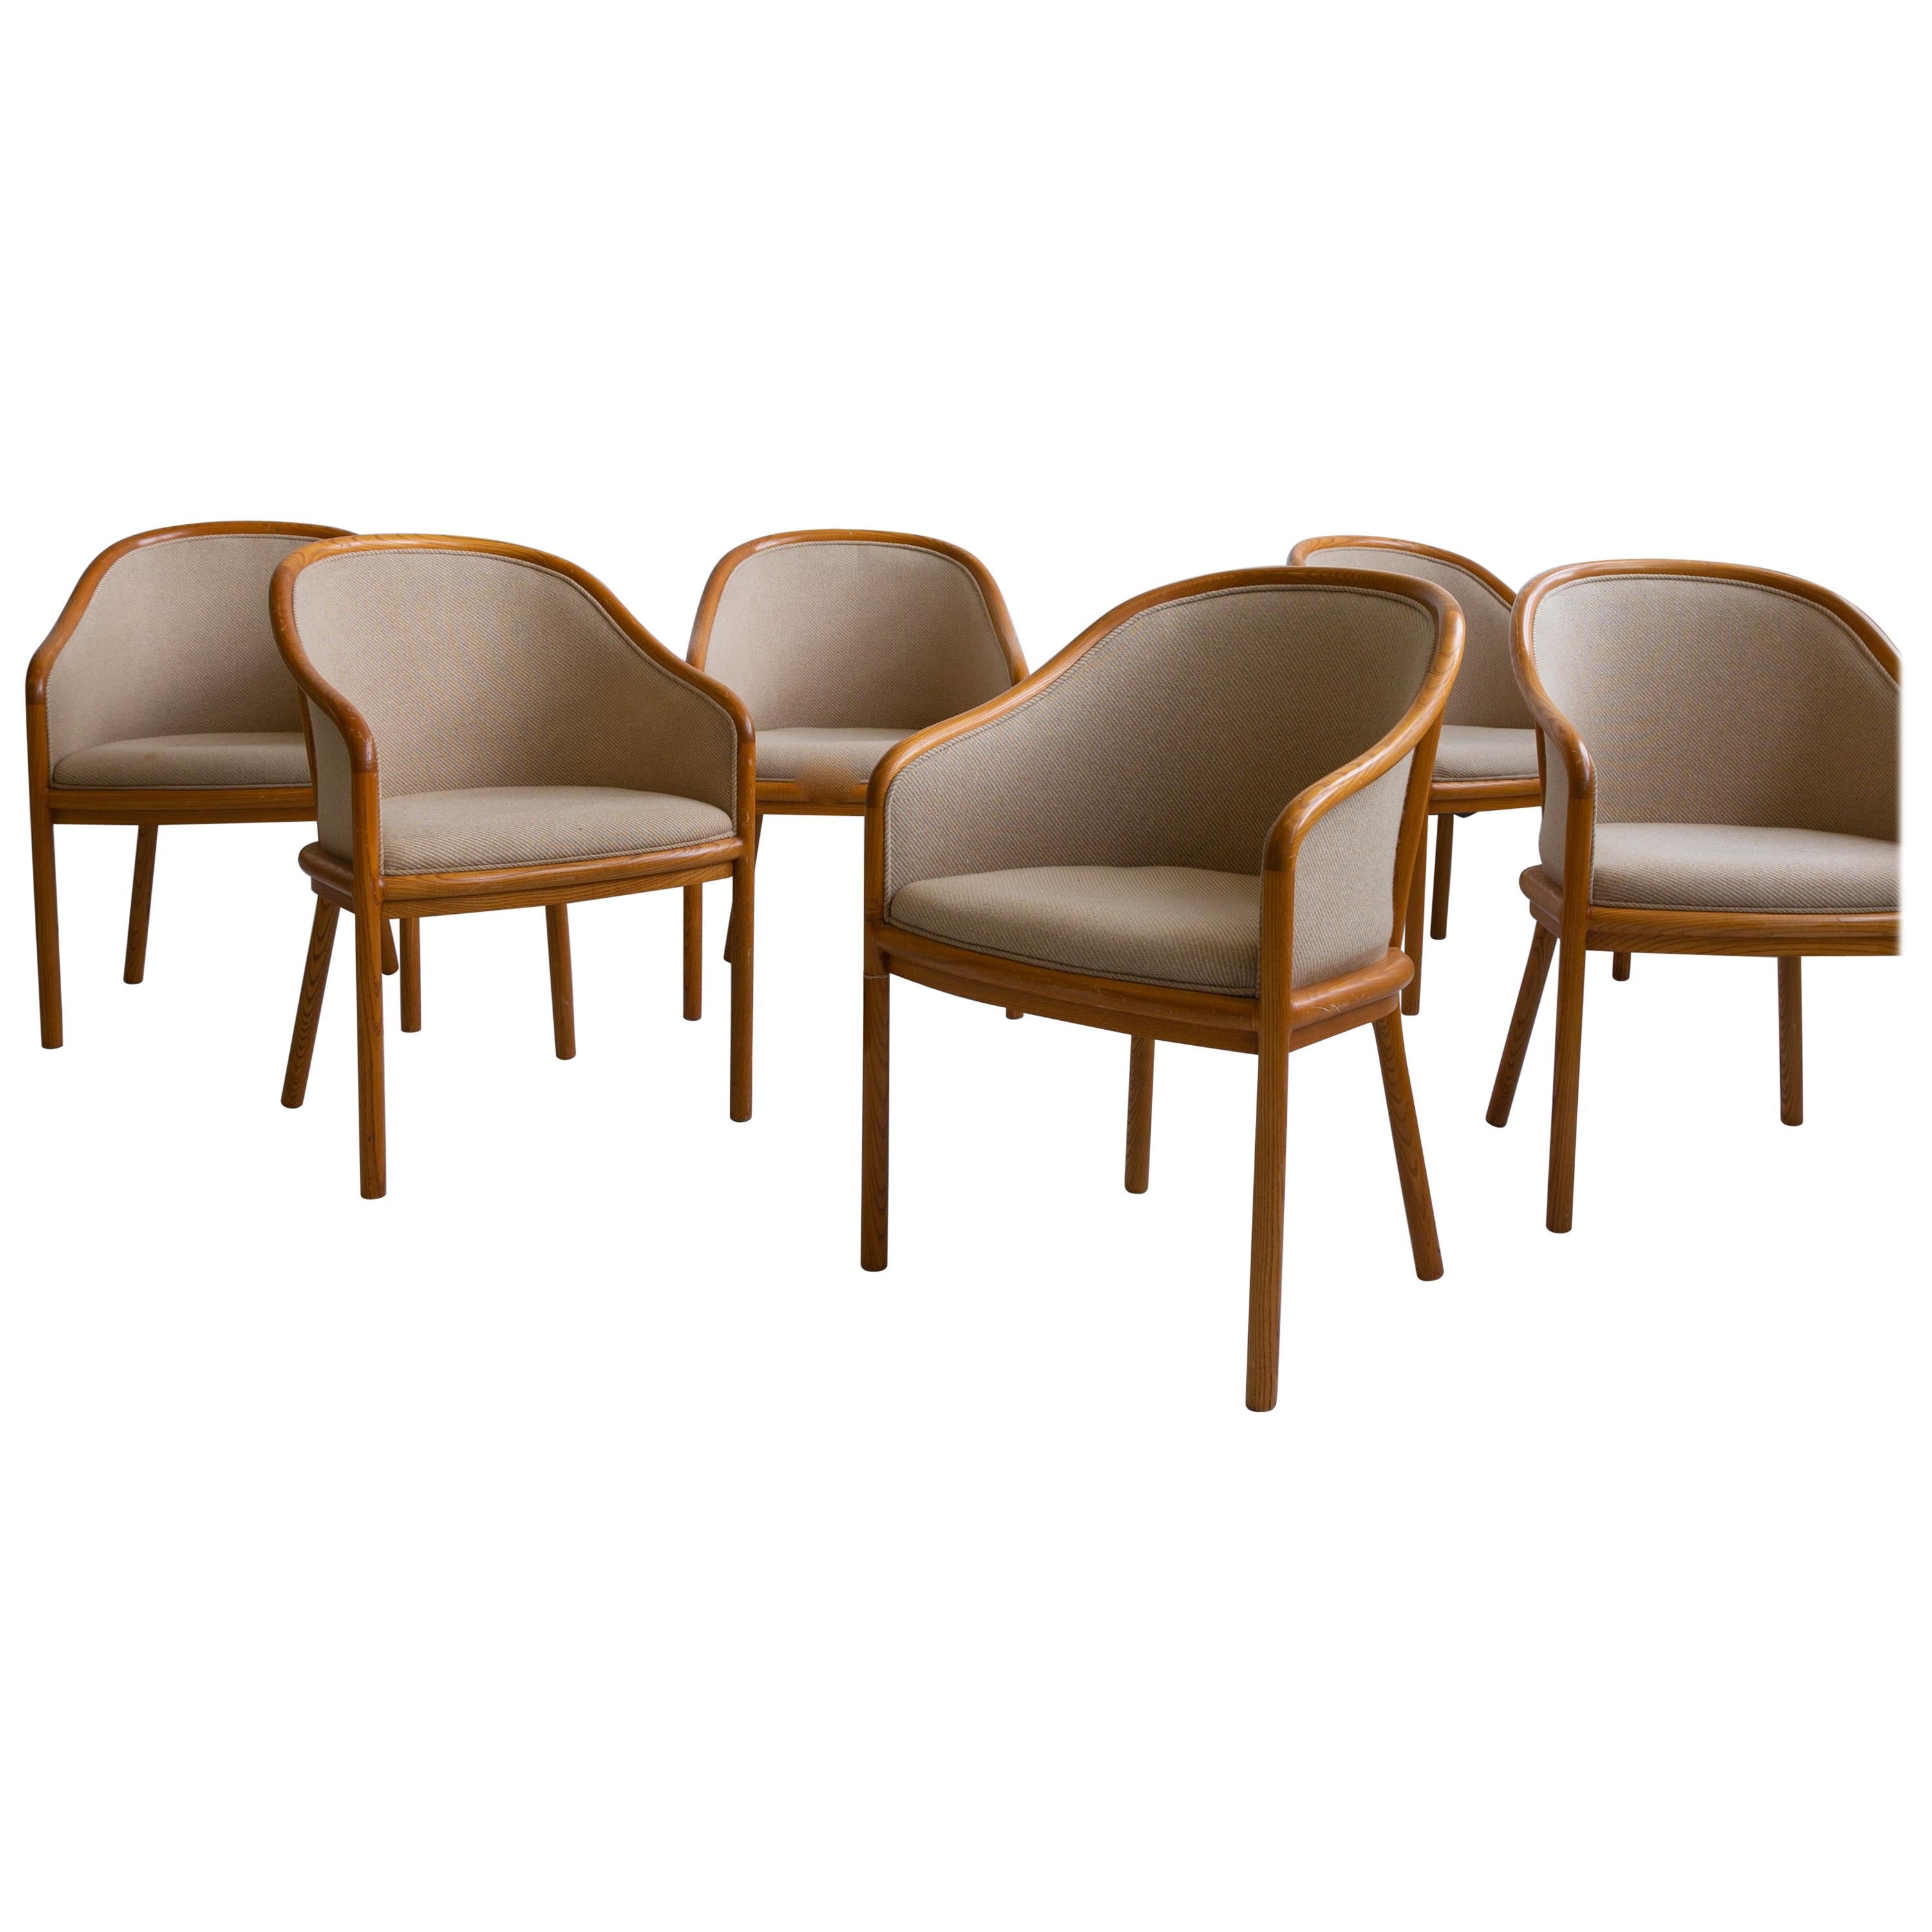 Six Vintage Upholstered Ward Bennett Dining Chairs, Mid-Century, American For Sale